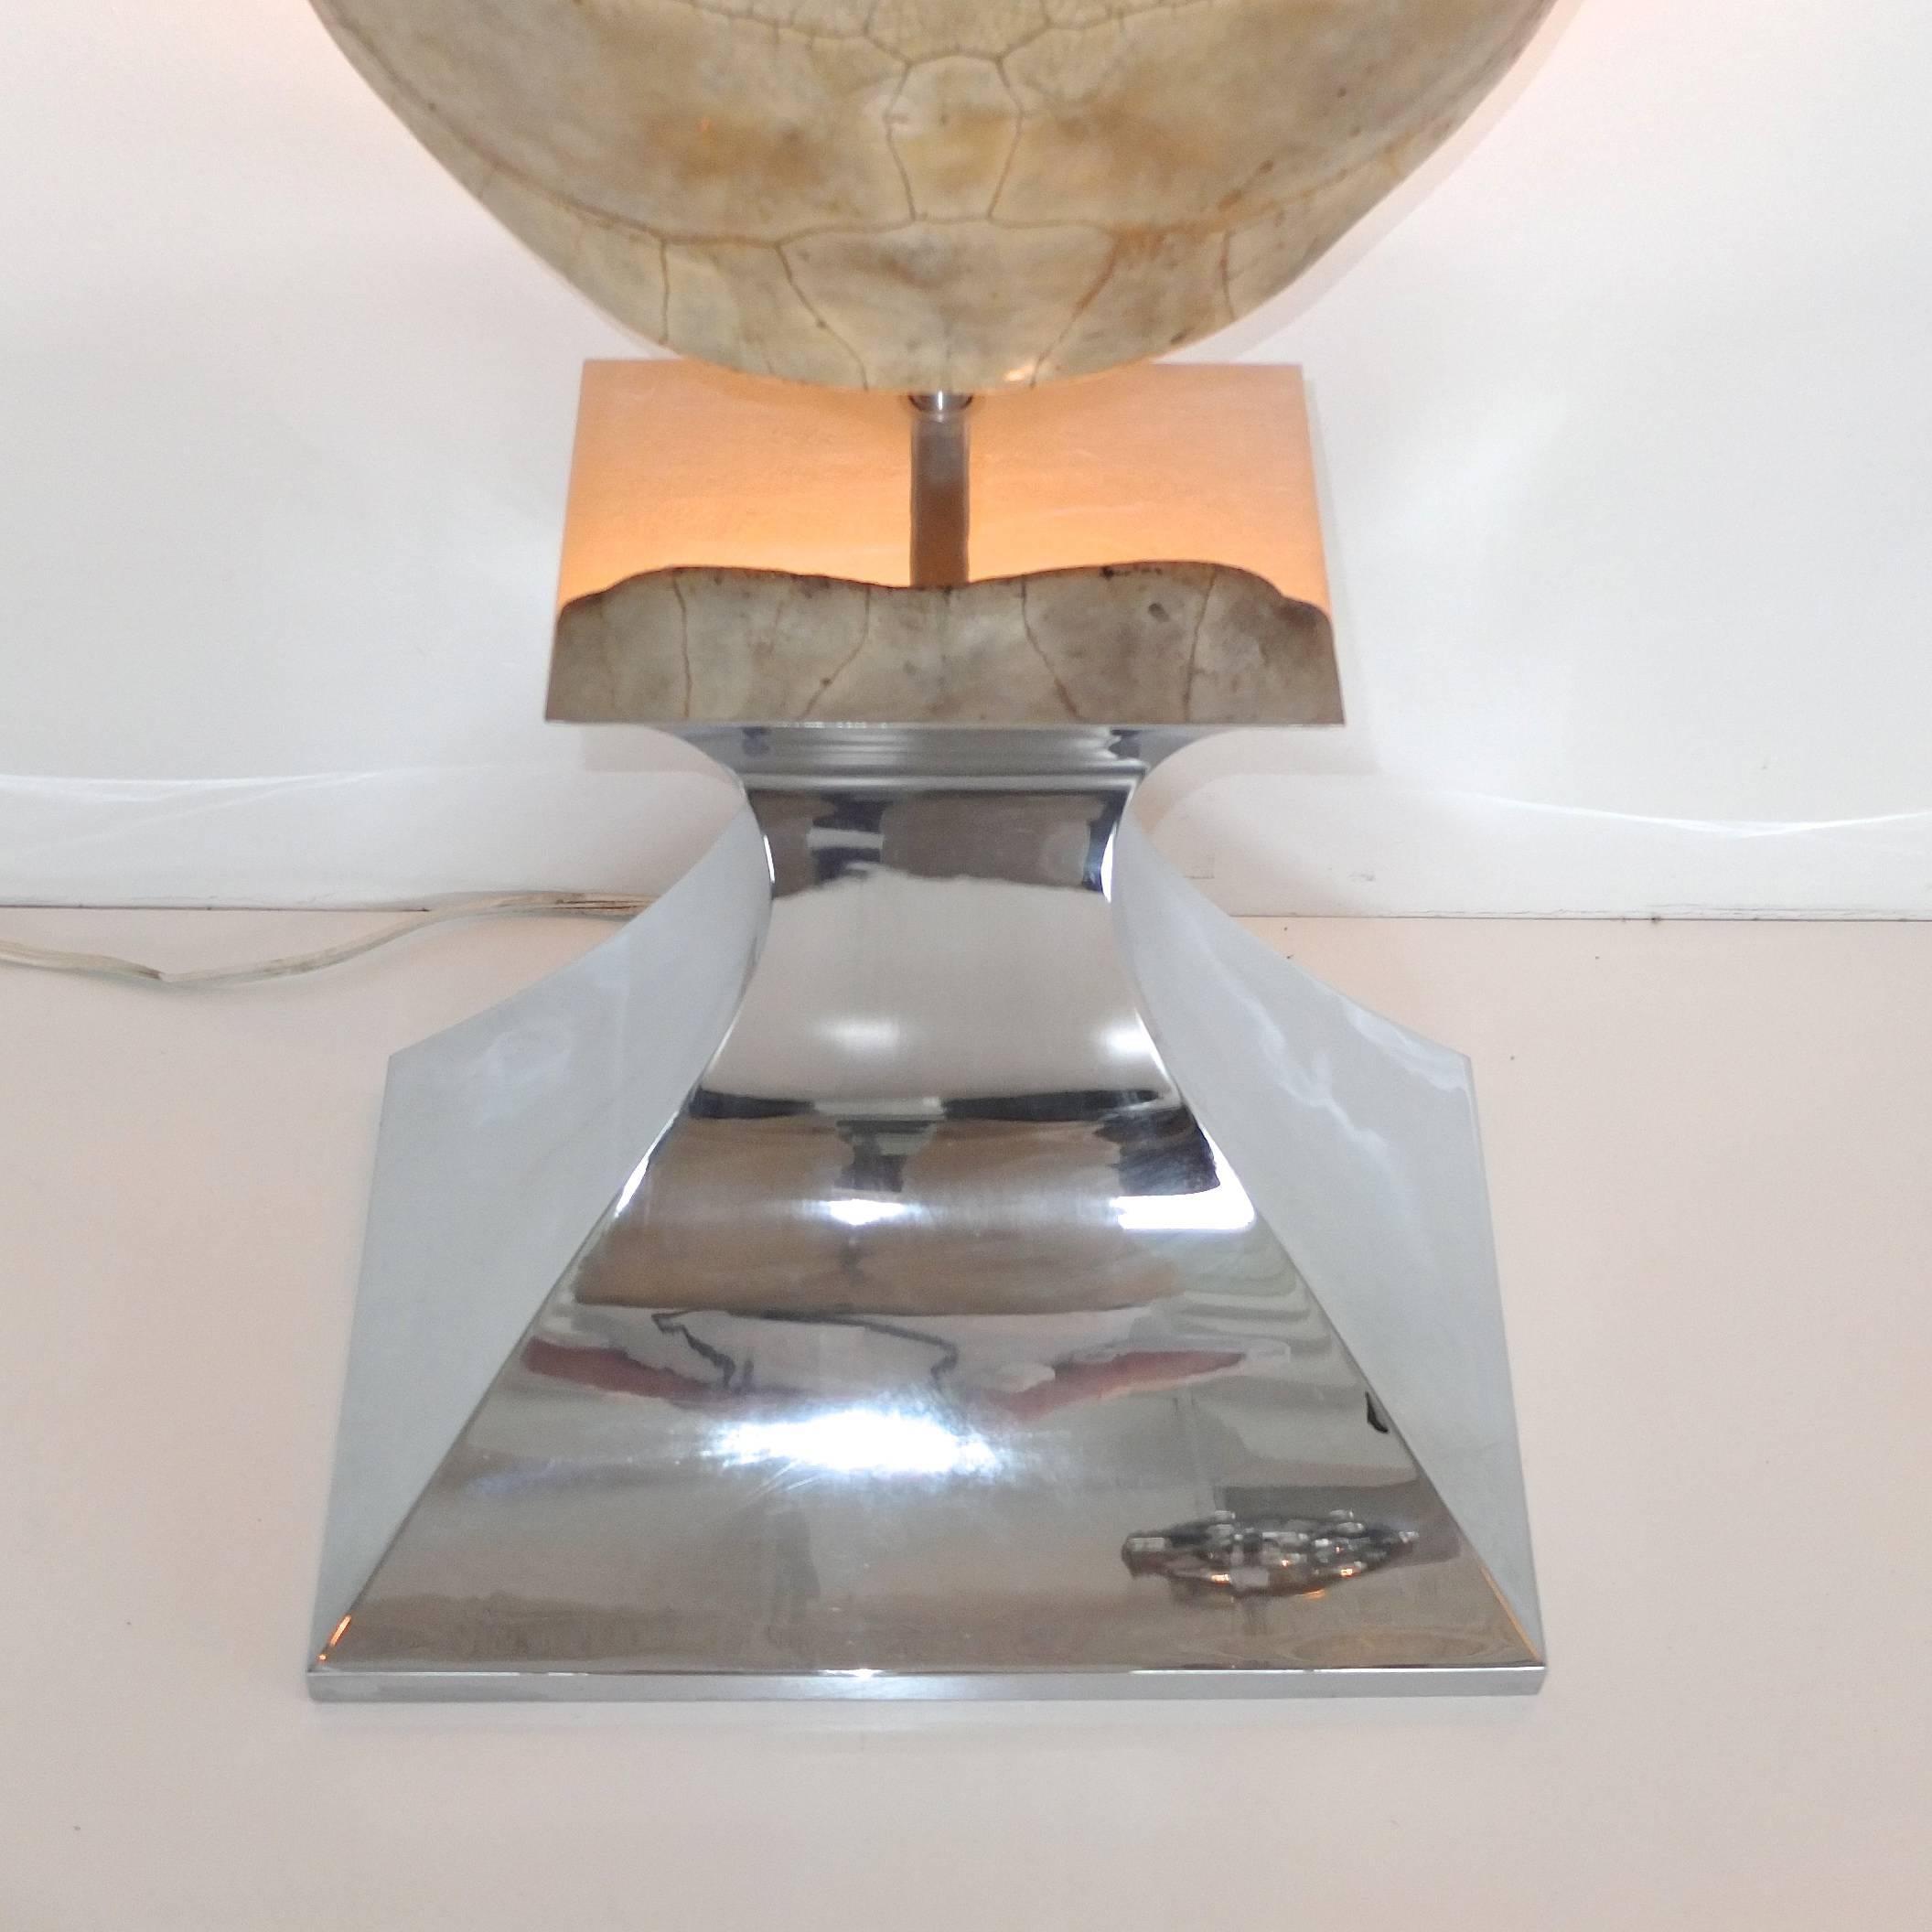 Polished Exotic & Sculptural Floor Lamp with Tortoise Shell Reflector